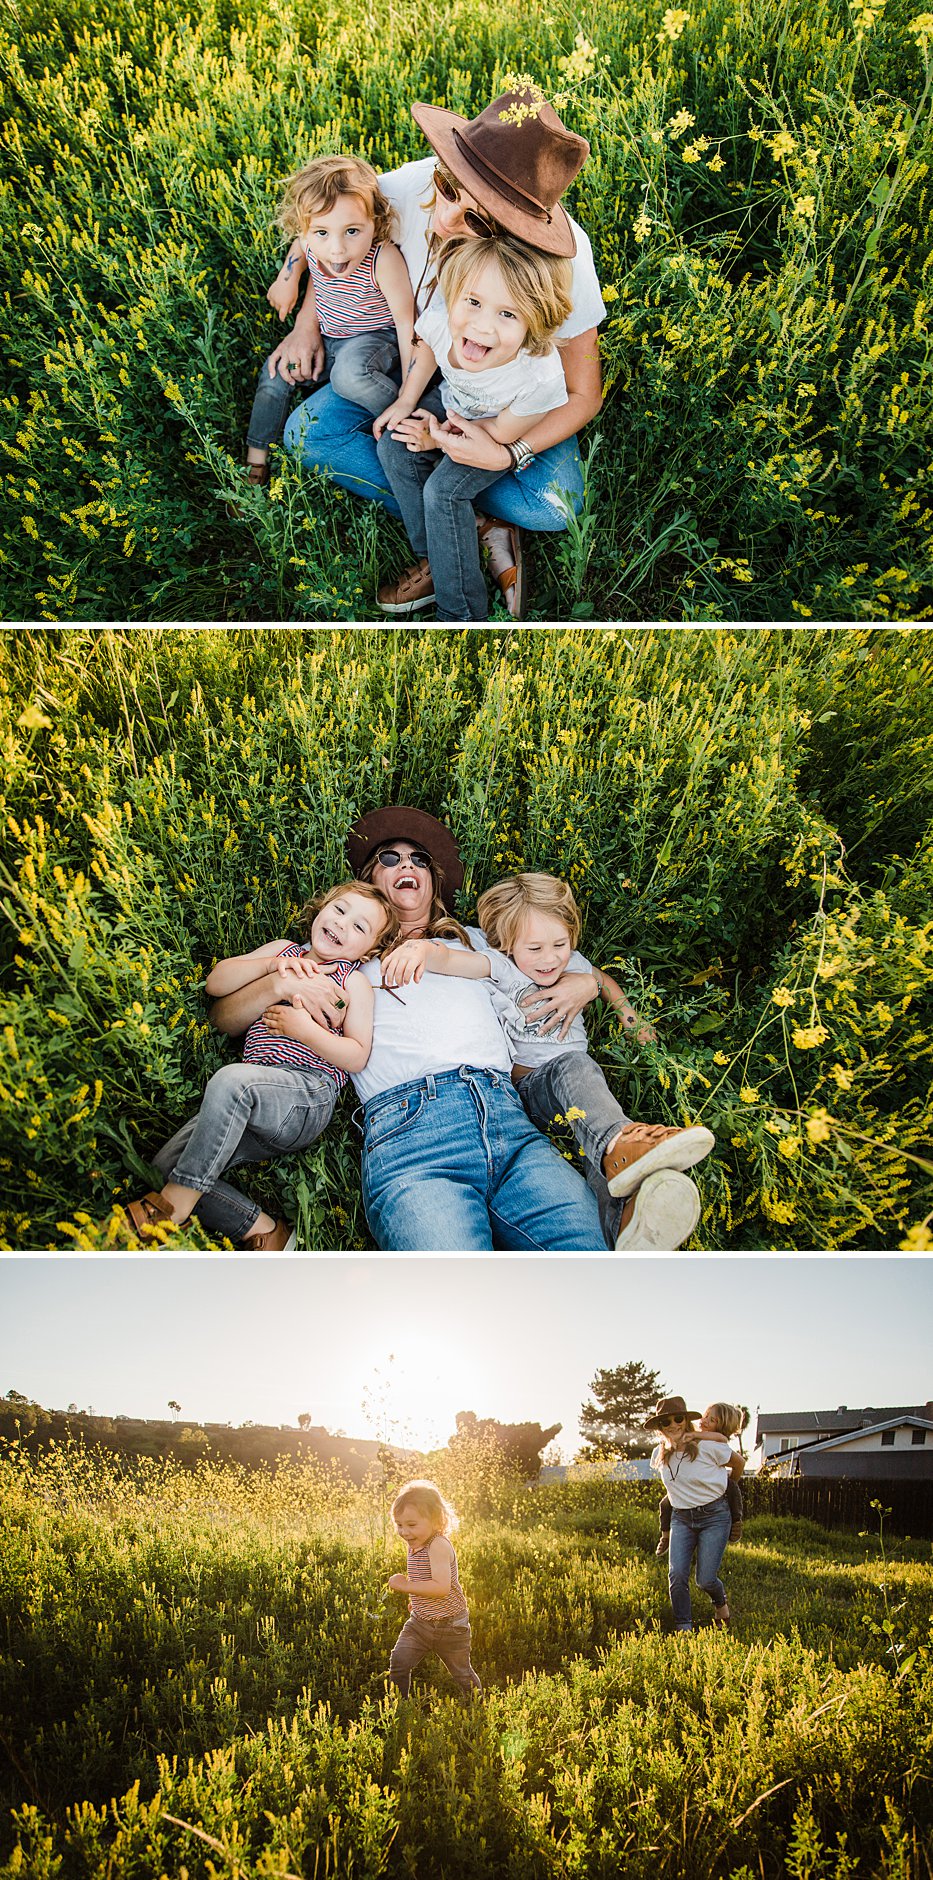 Golden hour sunset family photo, mother and sons running, documentary style family photo